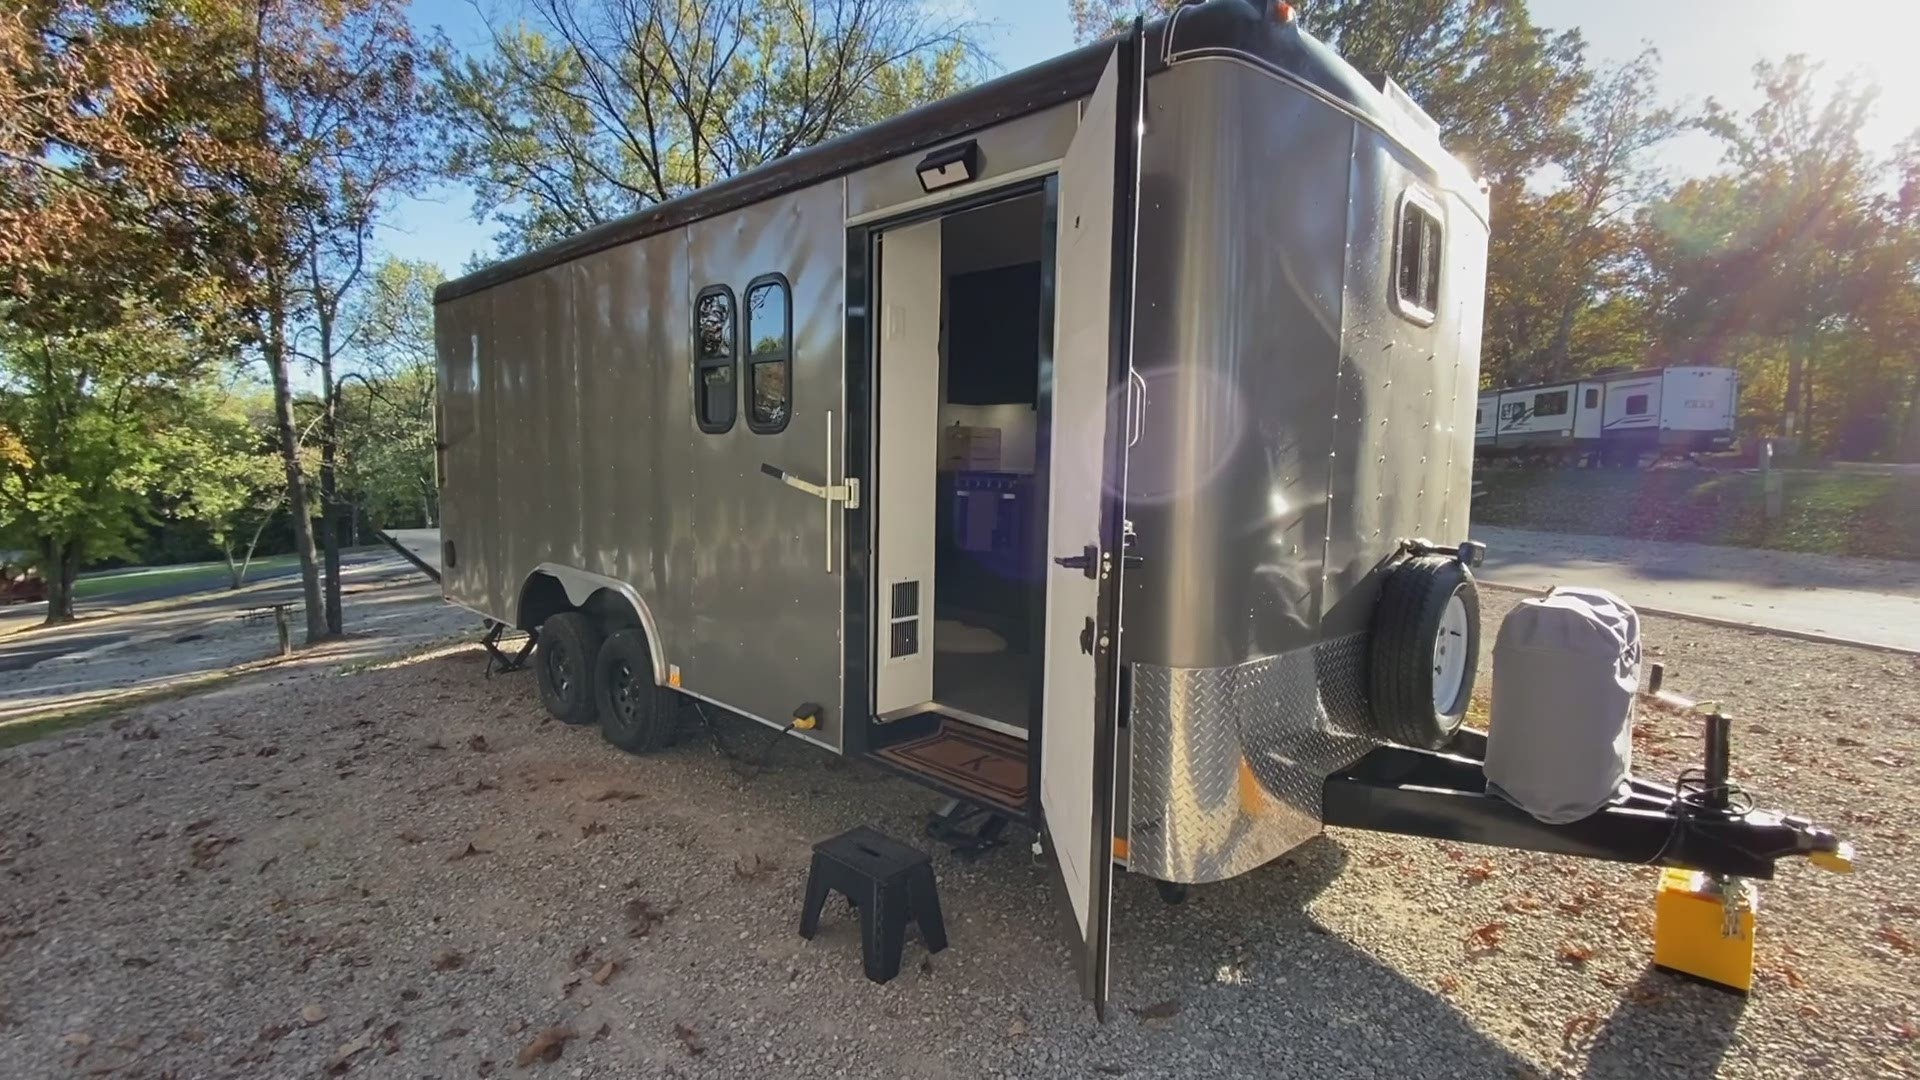 As COVID-19 restrictions upend our daily lives, one Houston couple has converted a toy hauler to a hotel suite on wheels. Now they're traveling the U.S.